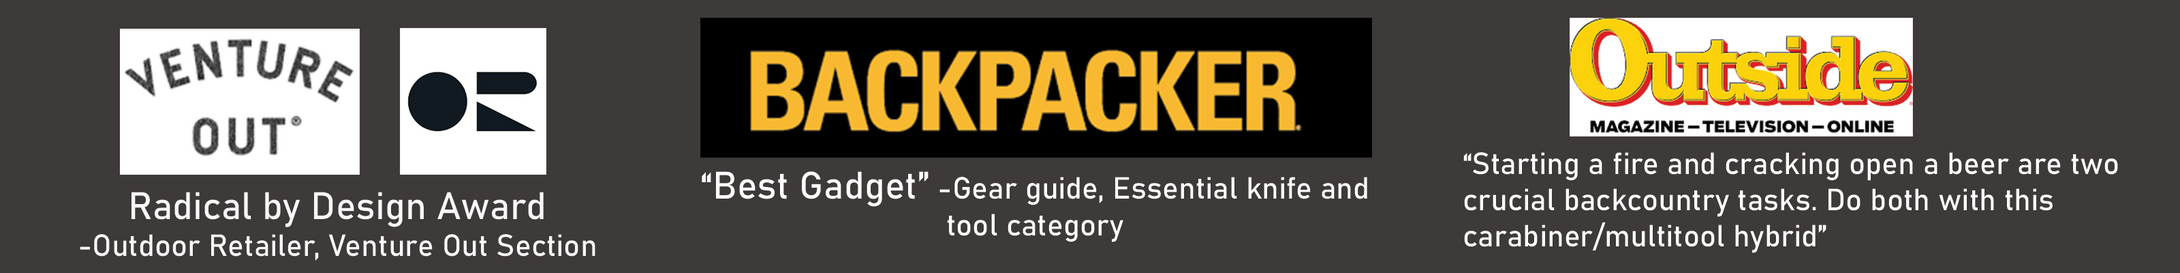 Radical by Design Award from Outdoor Retailer; Backpacker Best Gadget Award; Outside Magazine quote reads "Starting a fire and cracking open a beer are two crucial backcountry tasks. Do both with this carabiner/multitool hybrid."